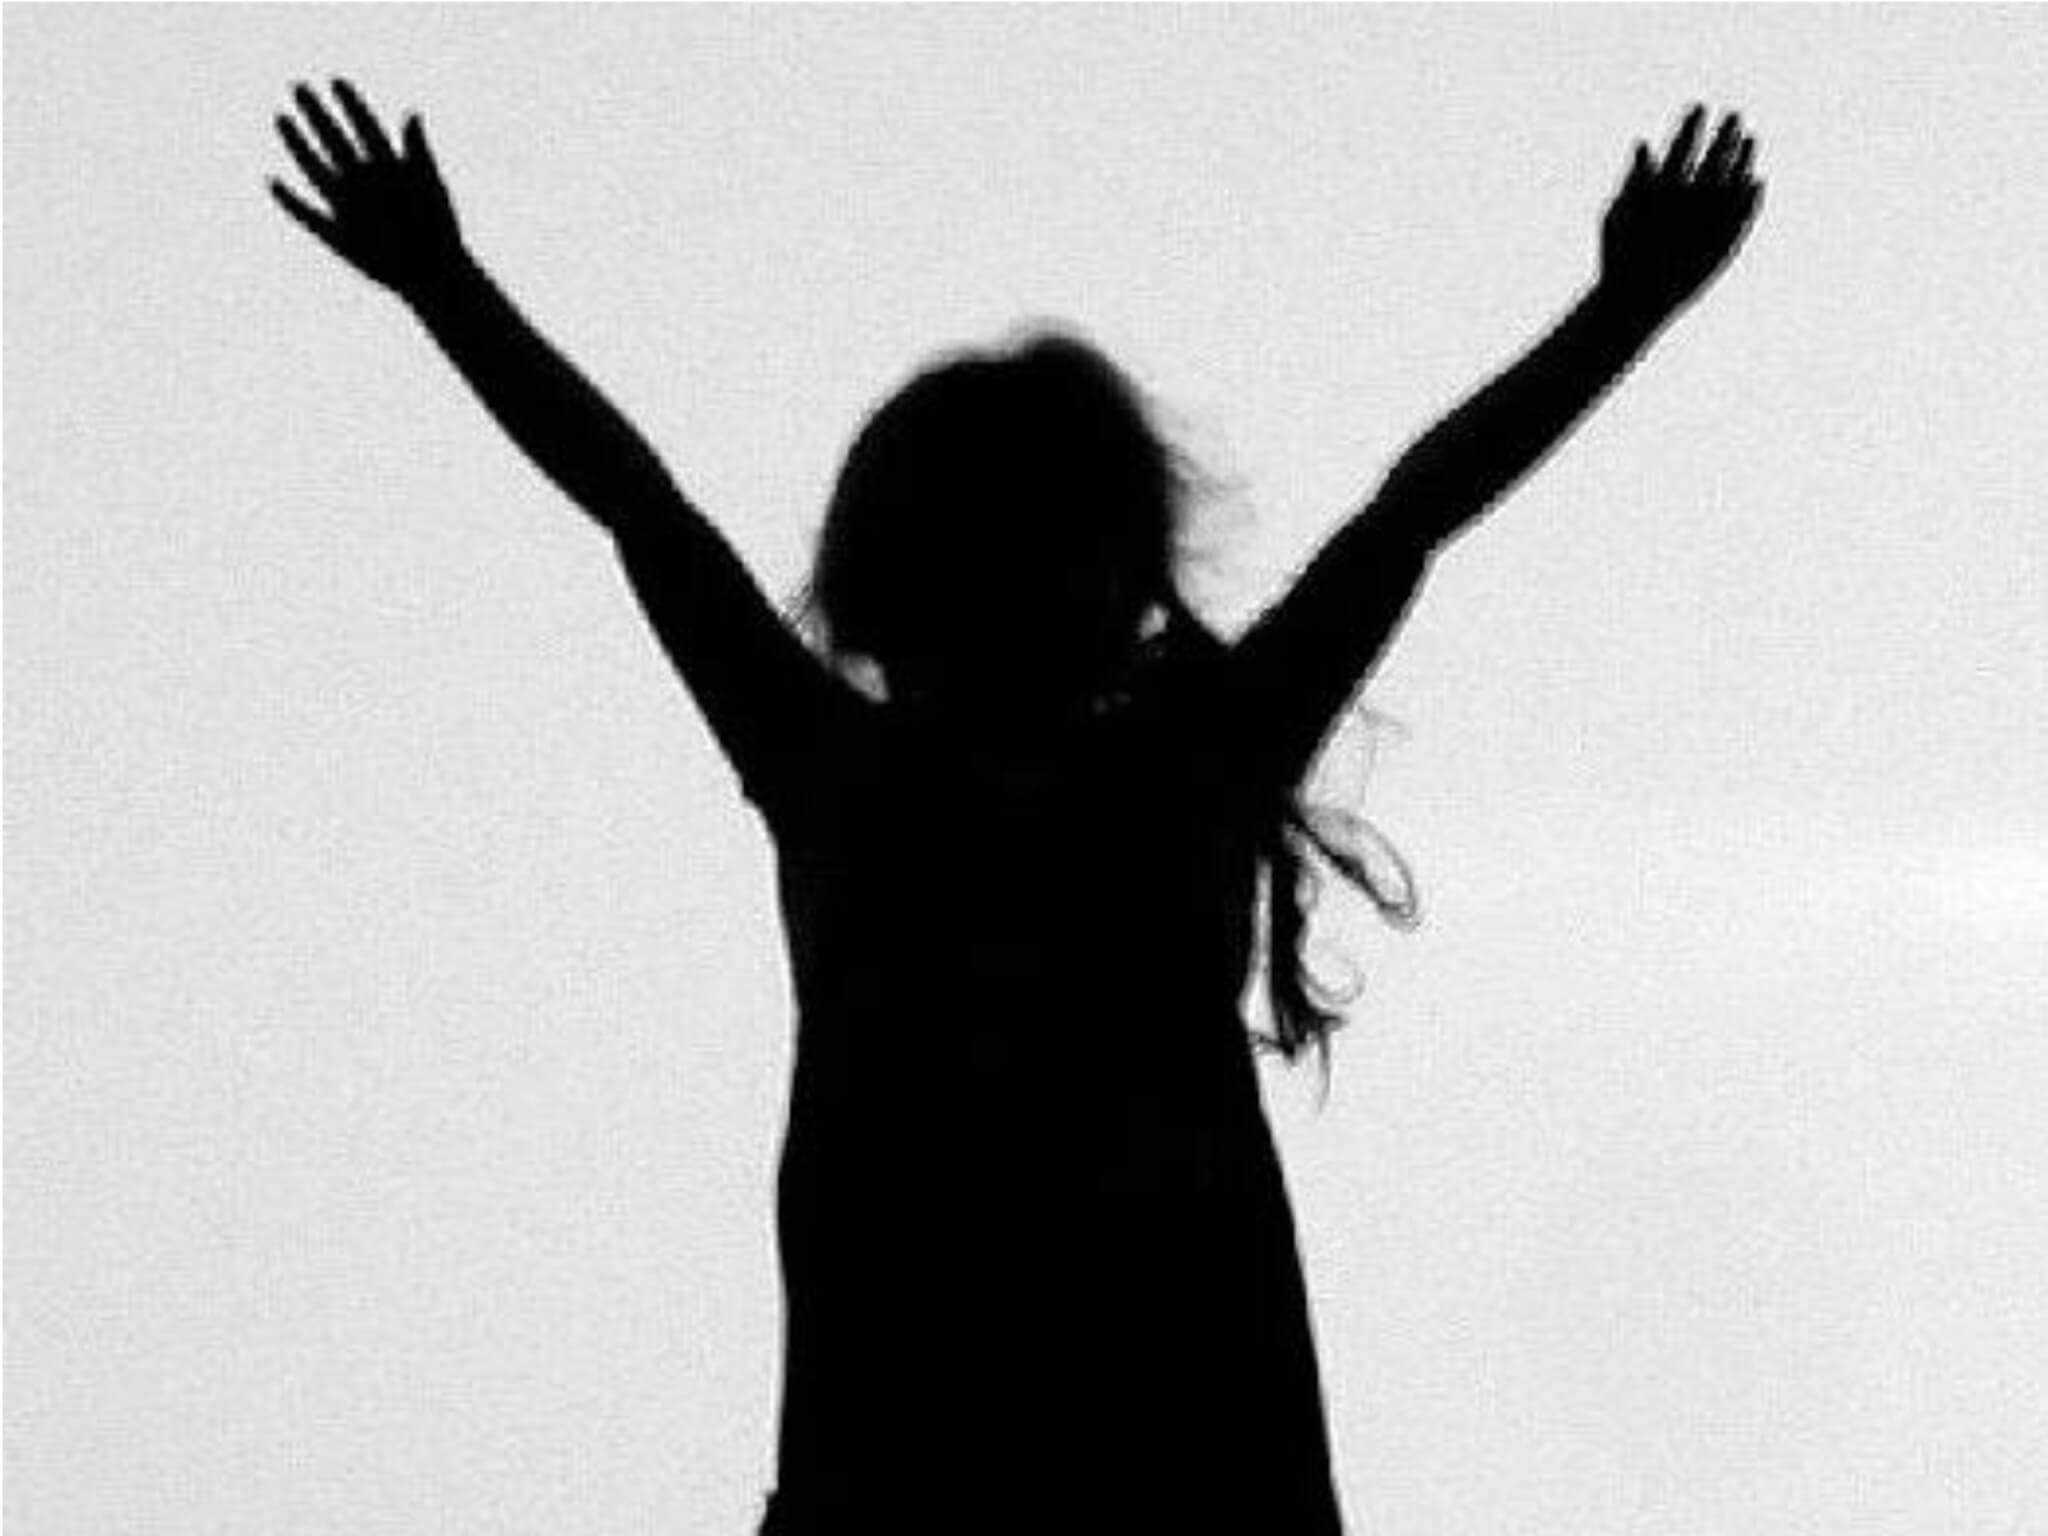 dark silhouette of child with long hair, arms upraised; against gray background - photo